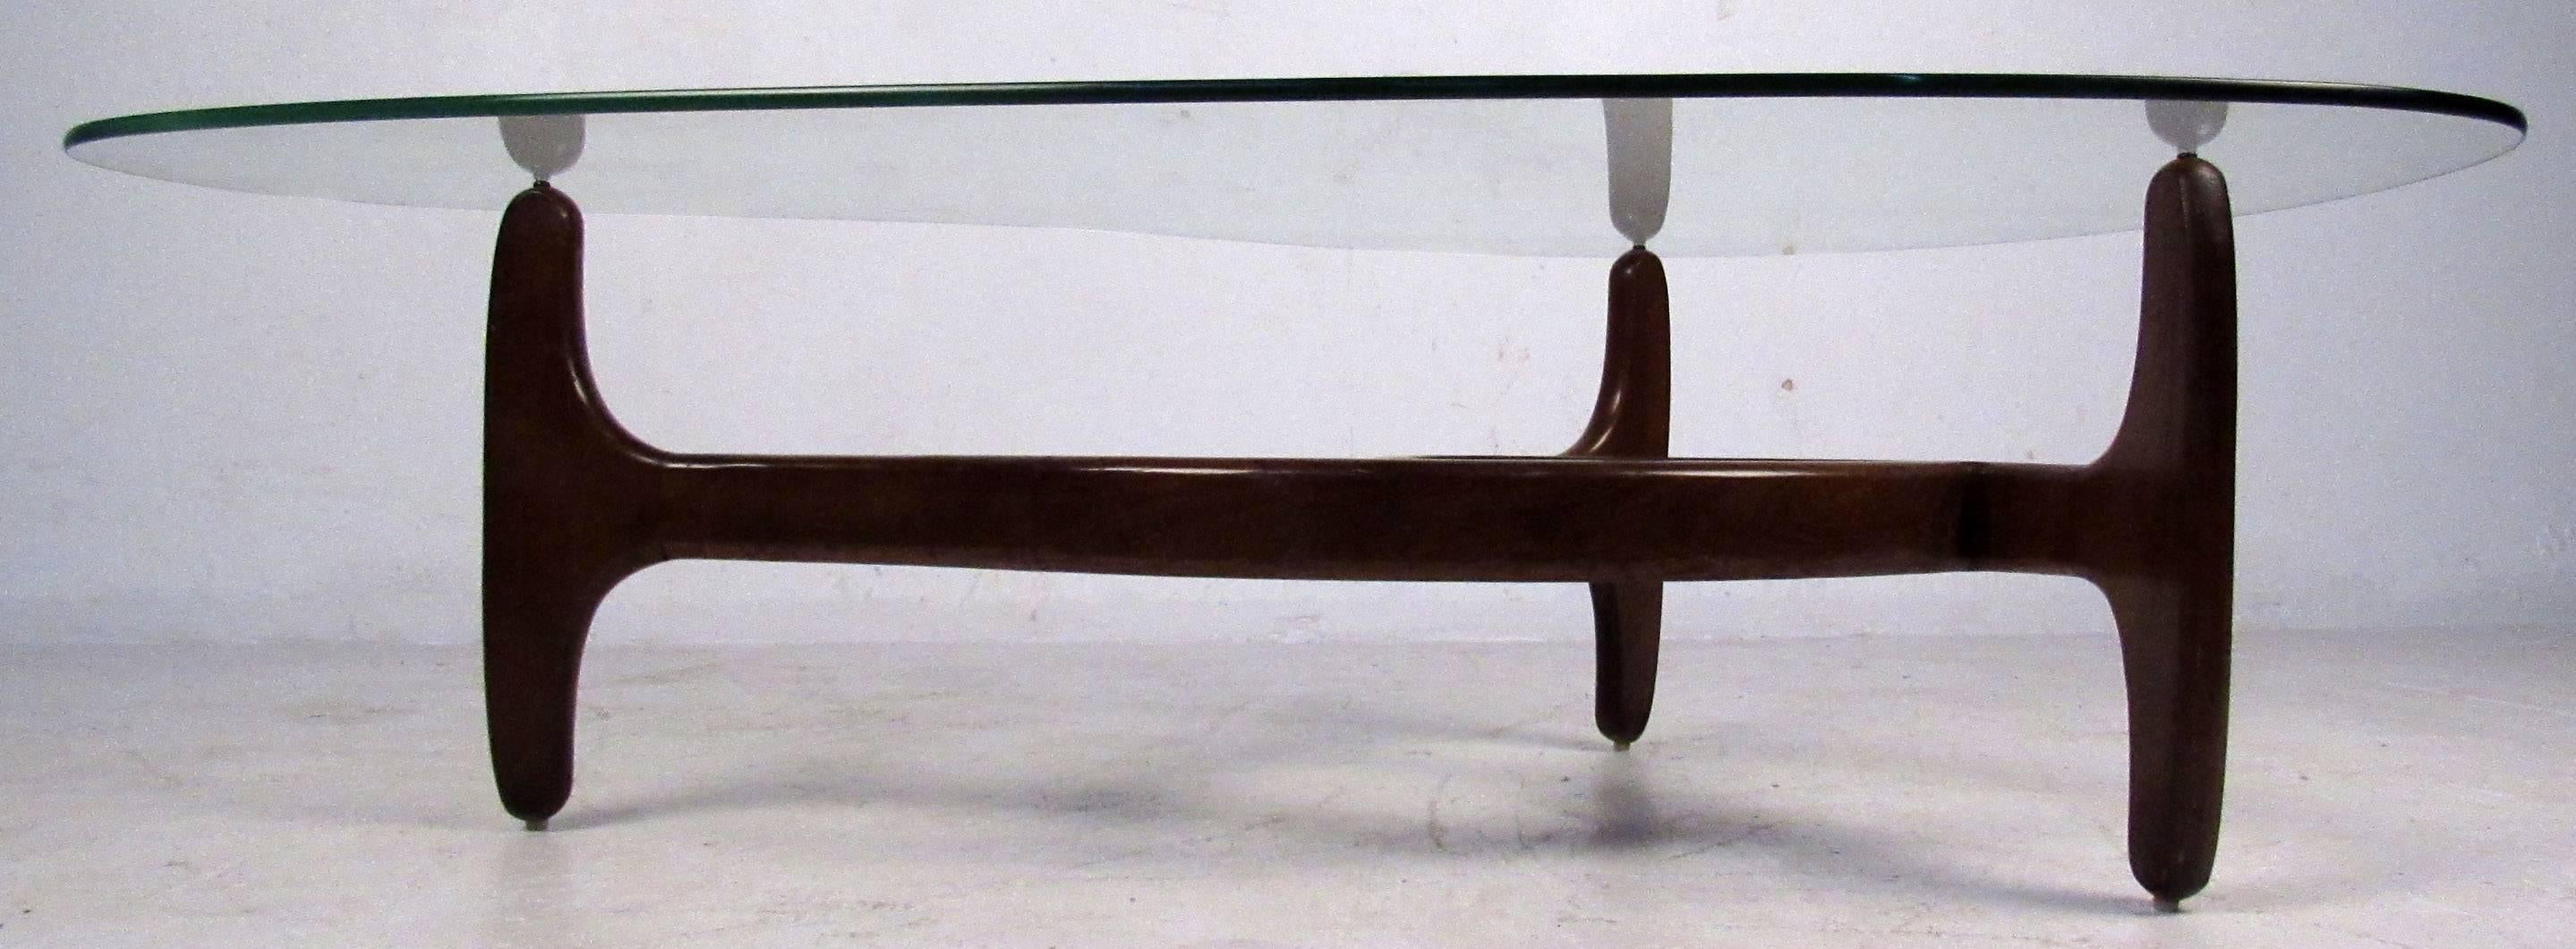 Vintage-modern coffee table featuring kidney shaped glass top and wild sculpted base. Designed in the manner of Adrian Pearsall. 

Please confirm item location NY or NJ with dealer.